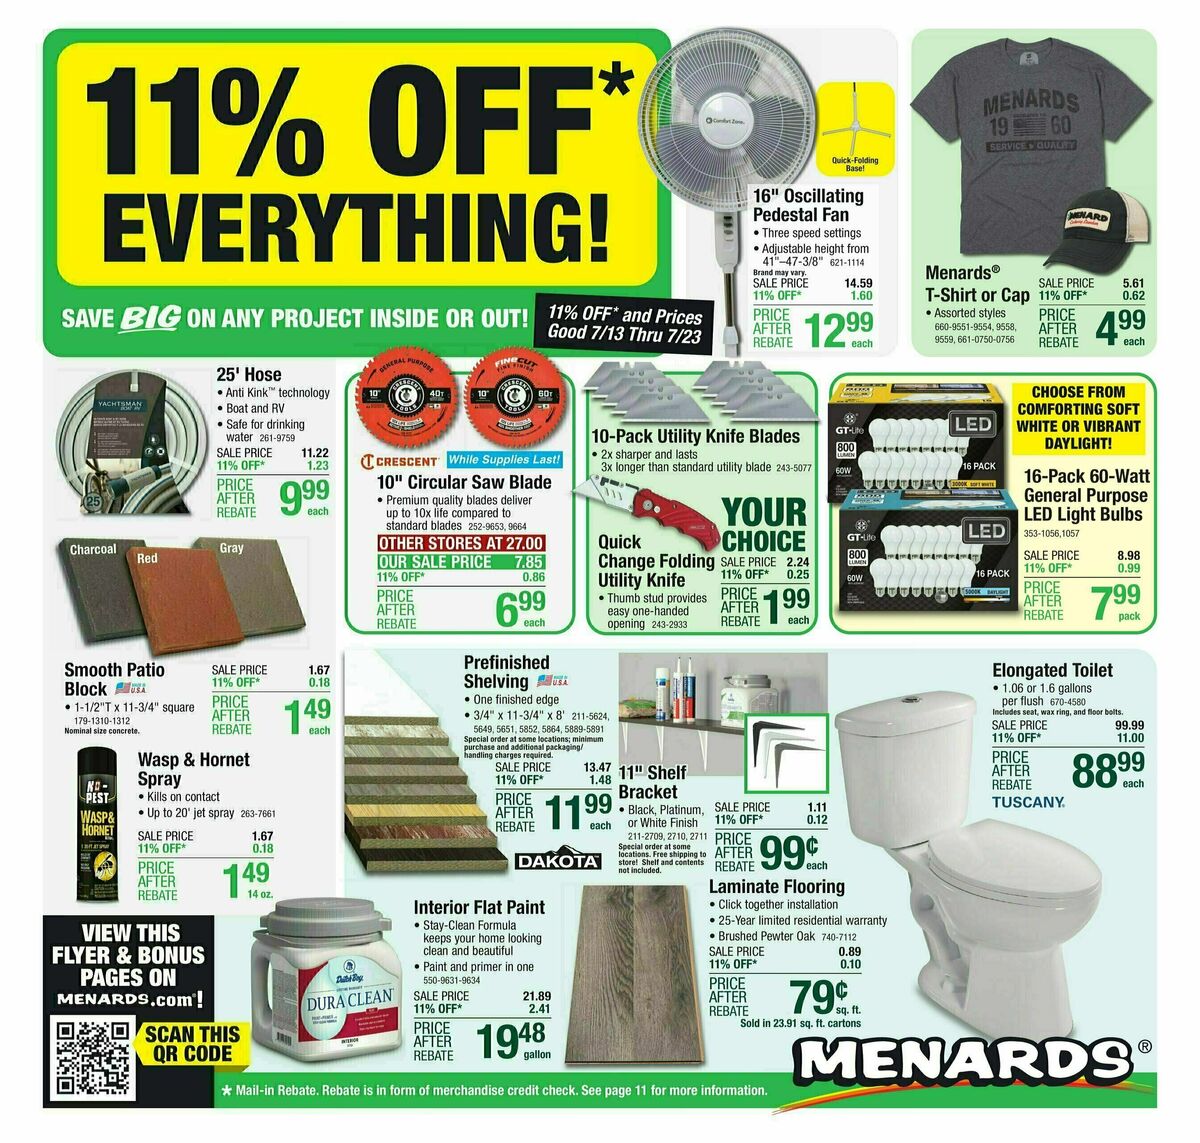 Menards Weekly Ad from July 12